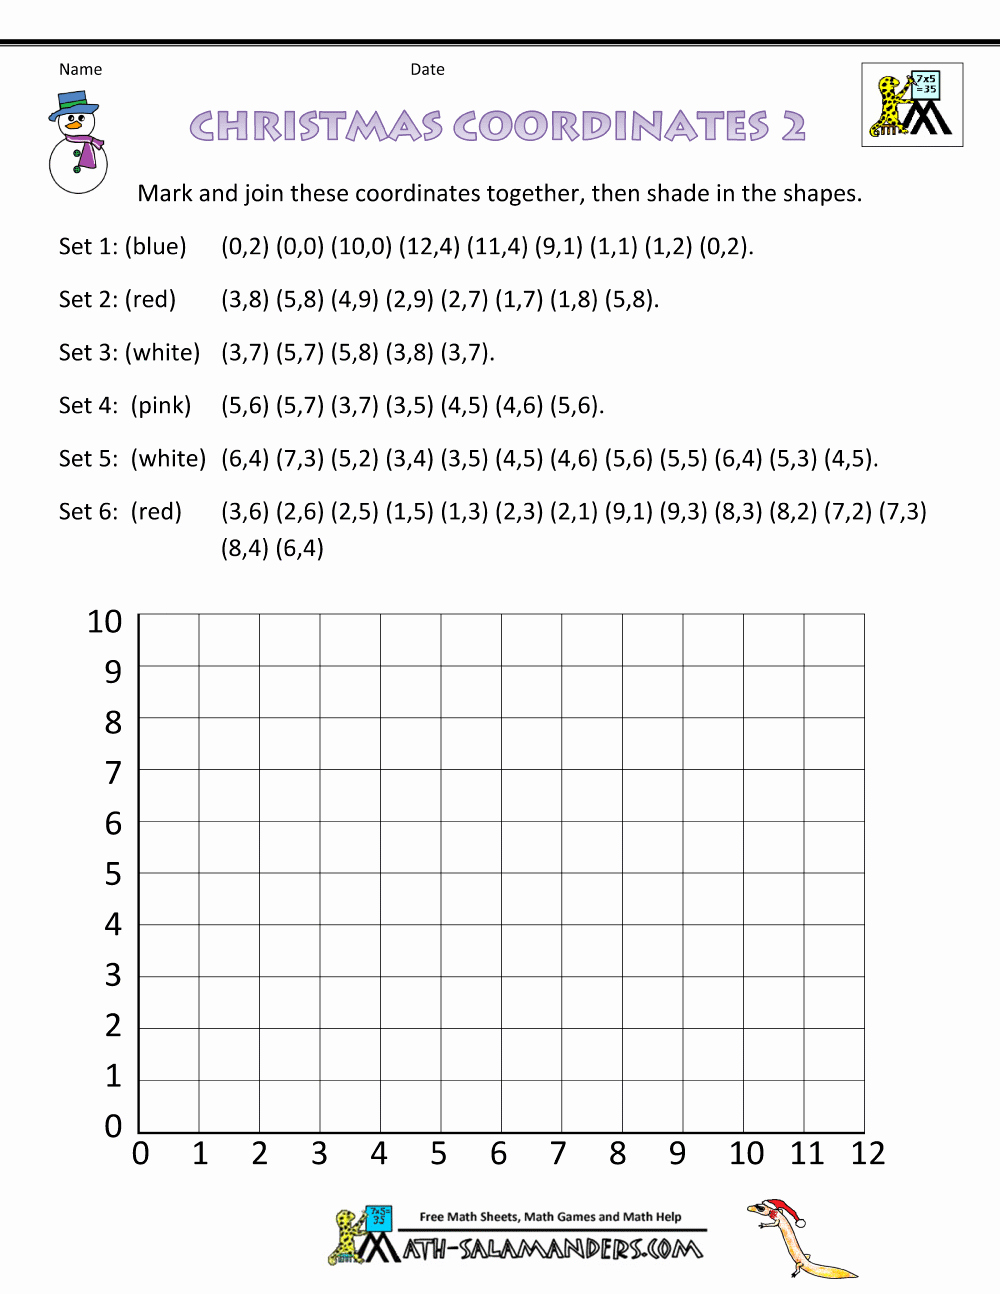 Free Coordinate Graphing Worksheets New Search Results for “coordinate Graphing Picture Puzzles